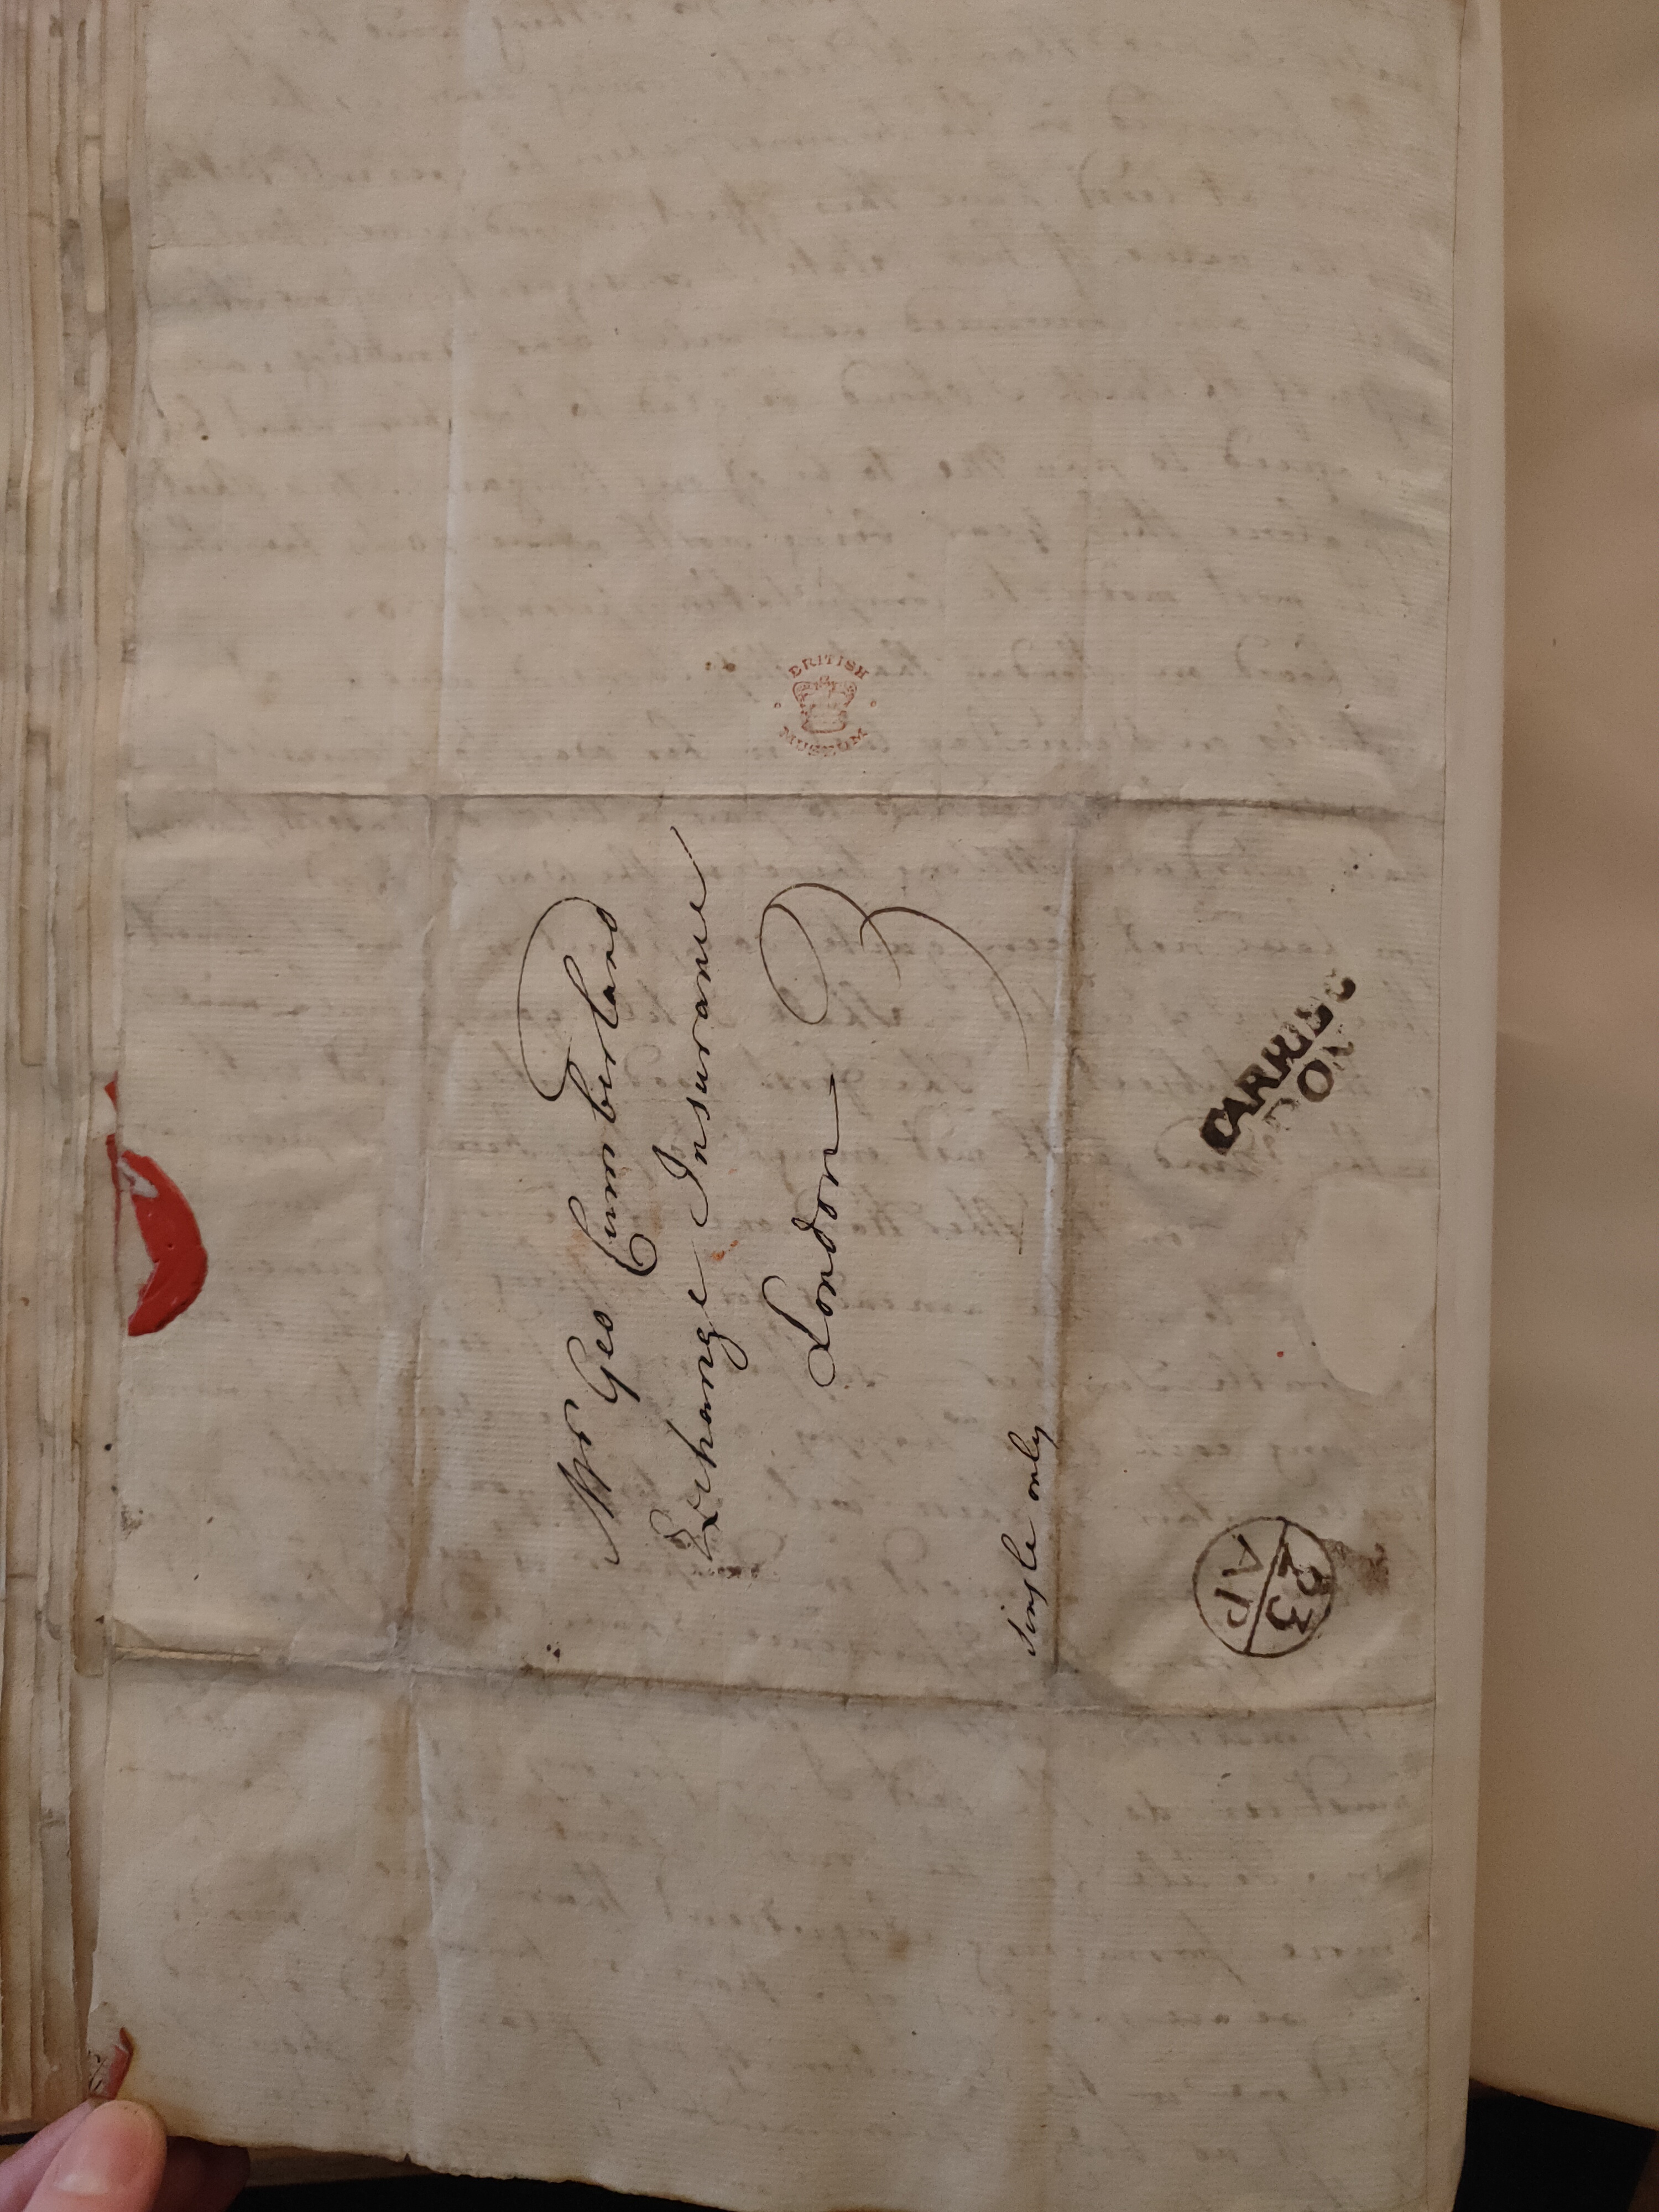 Image #4 of letter: Revd Richard Cumberland to George Cumberland, 20 April 1778